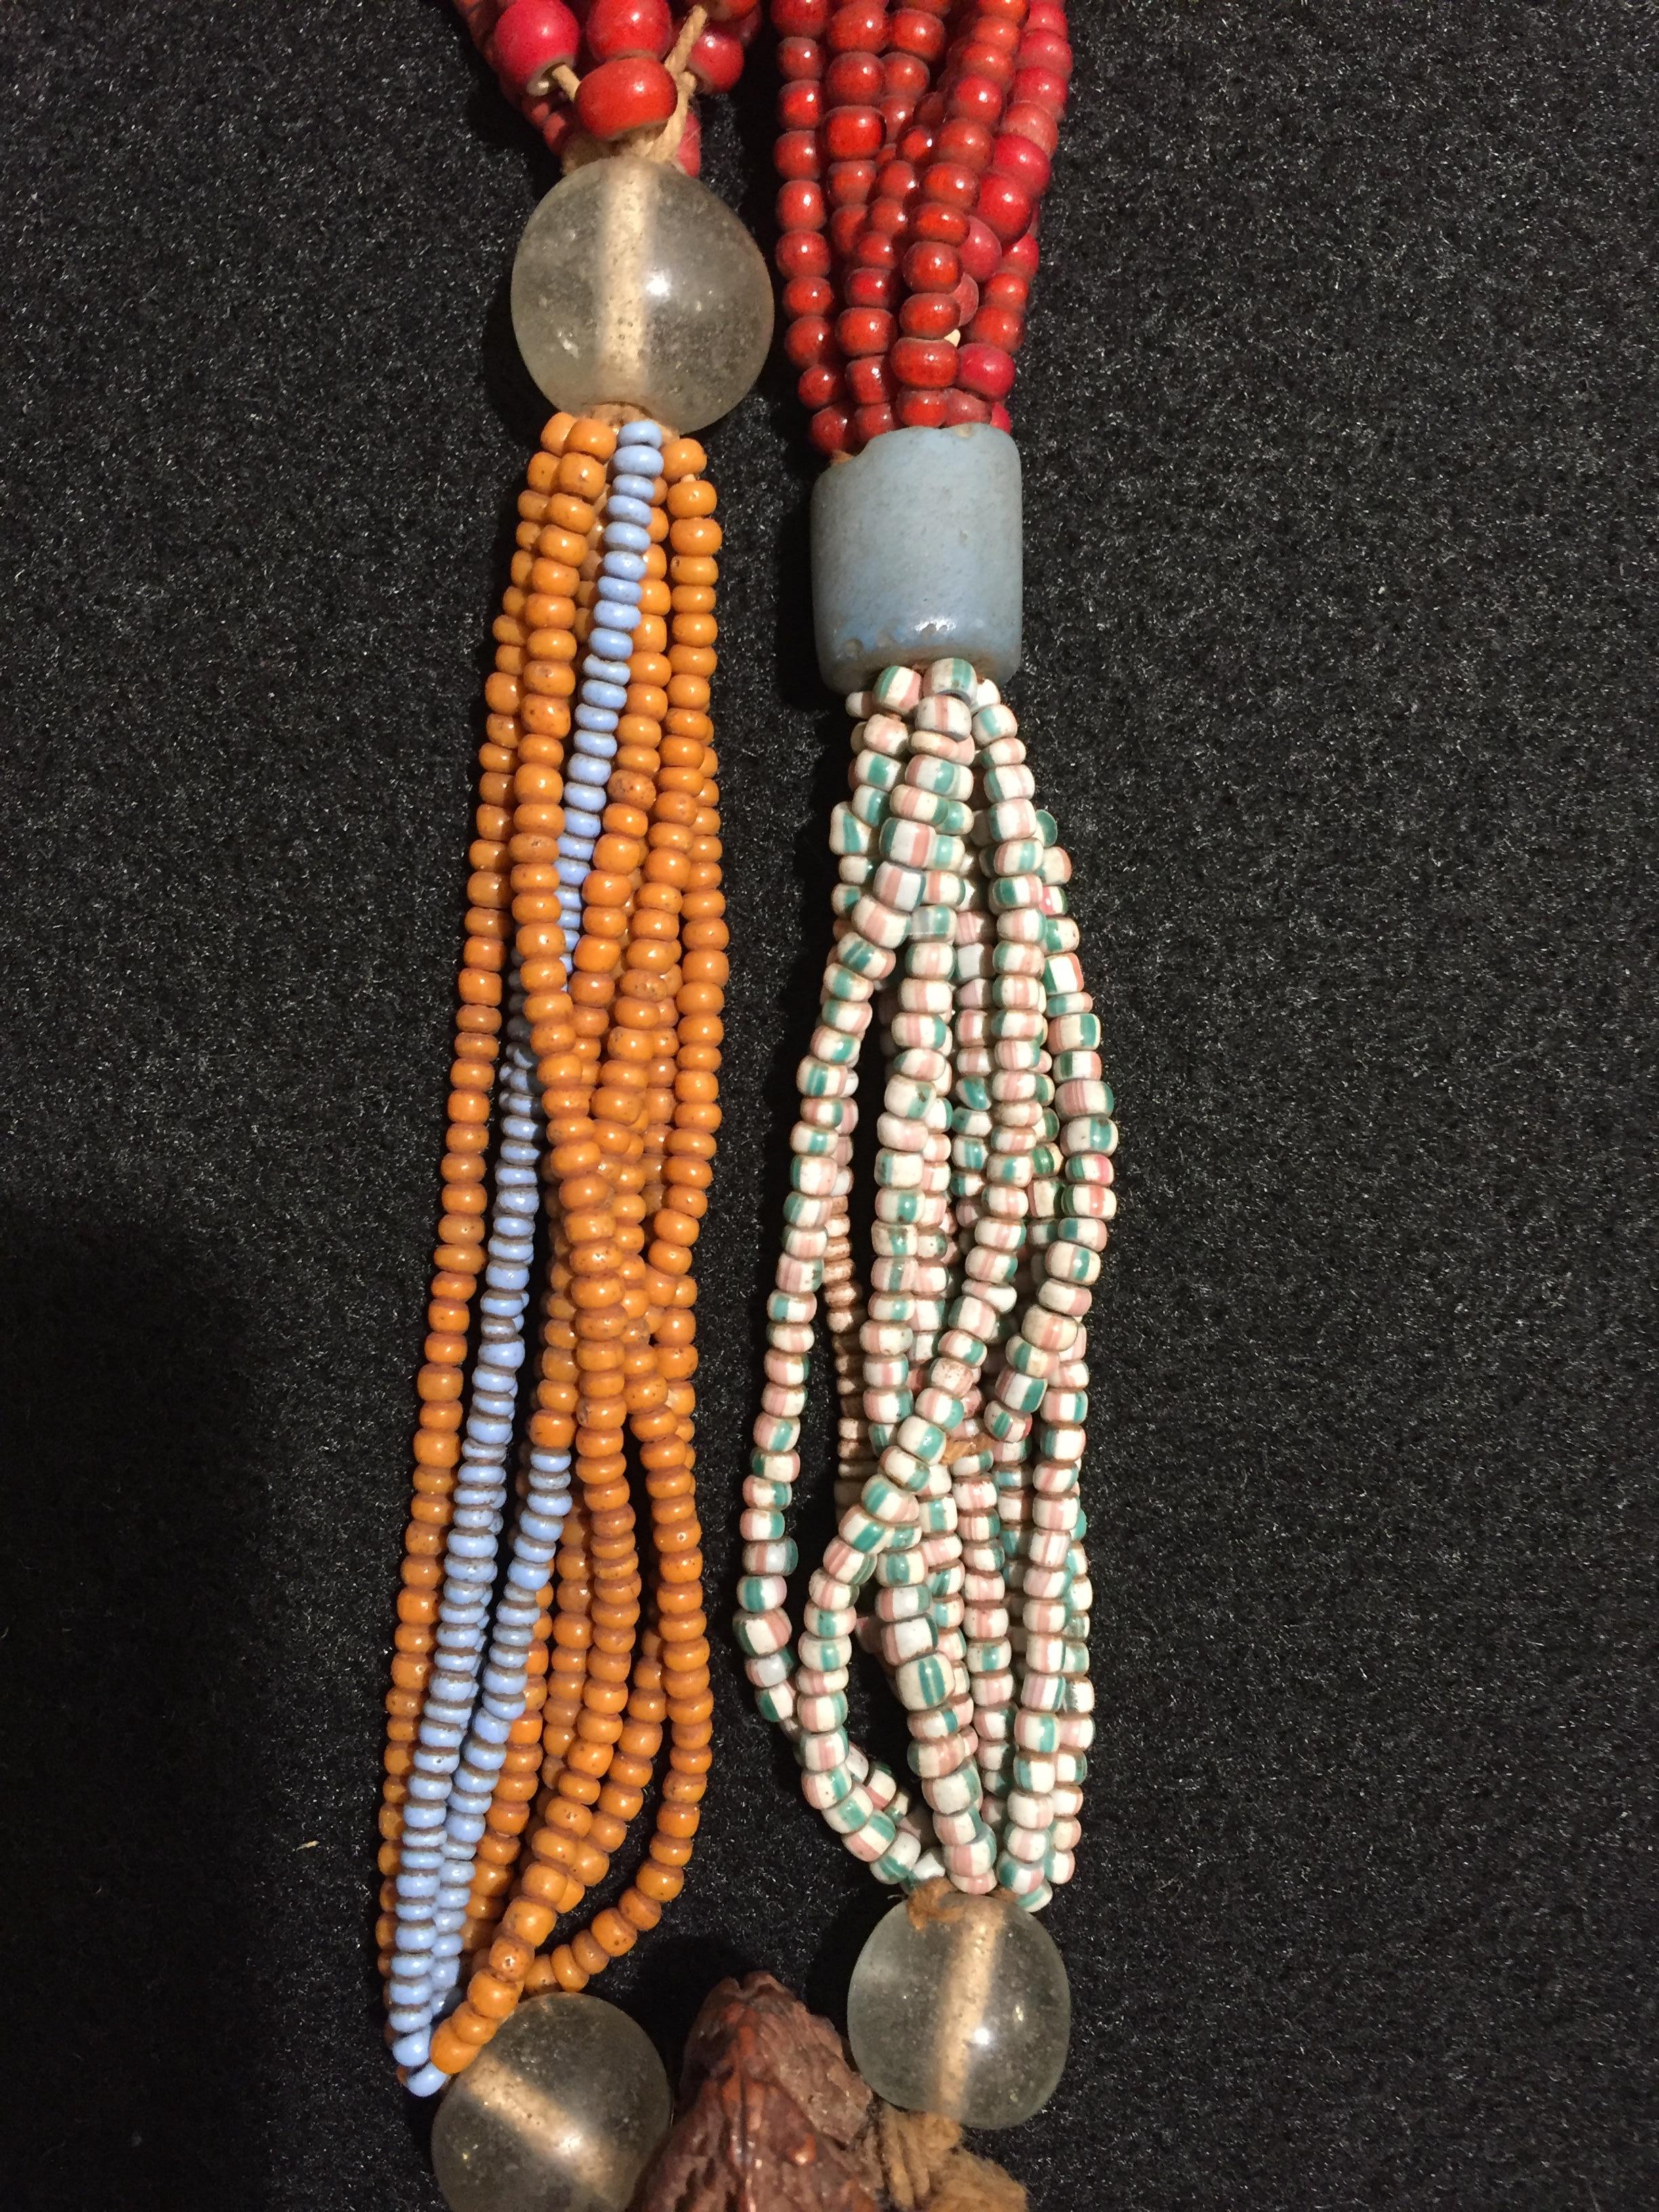 Beaded Yoruba African Diviner's Necklace with Glass Beads